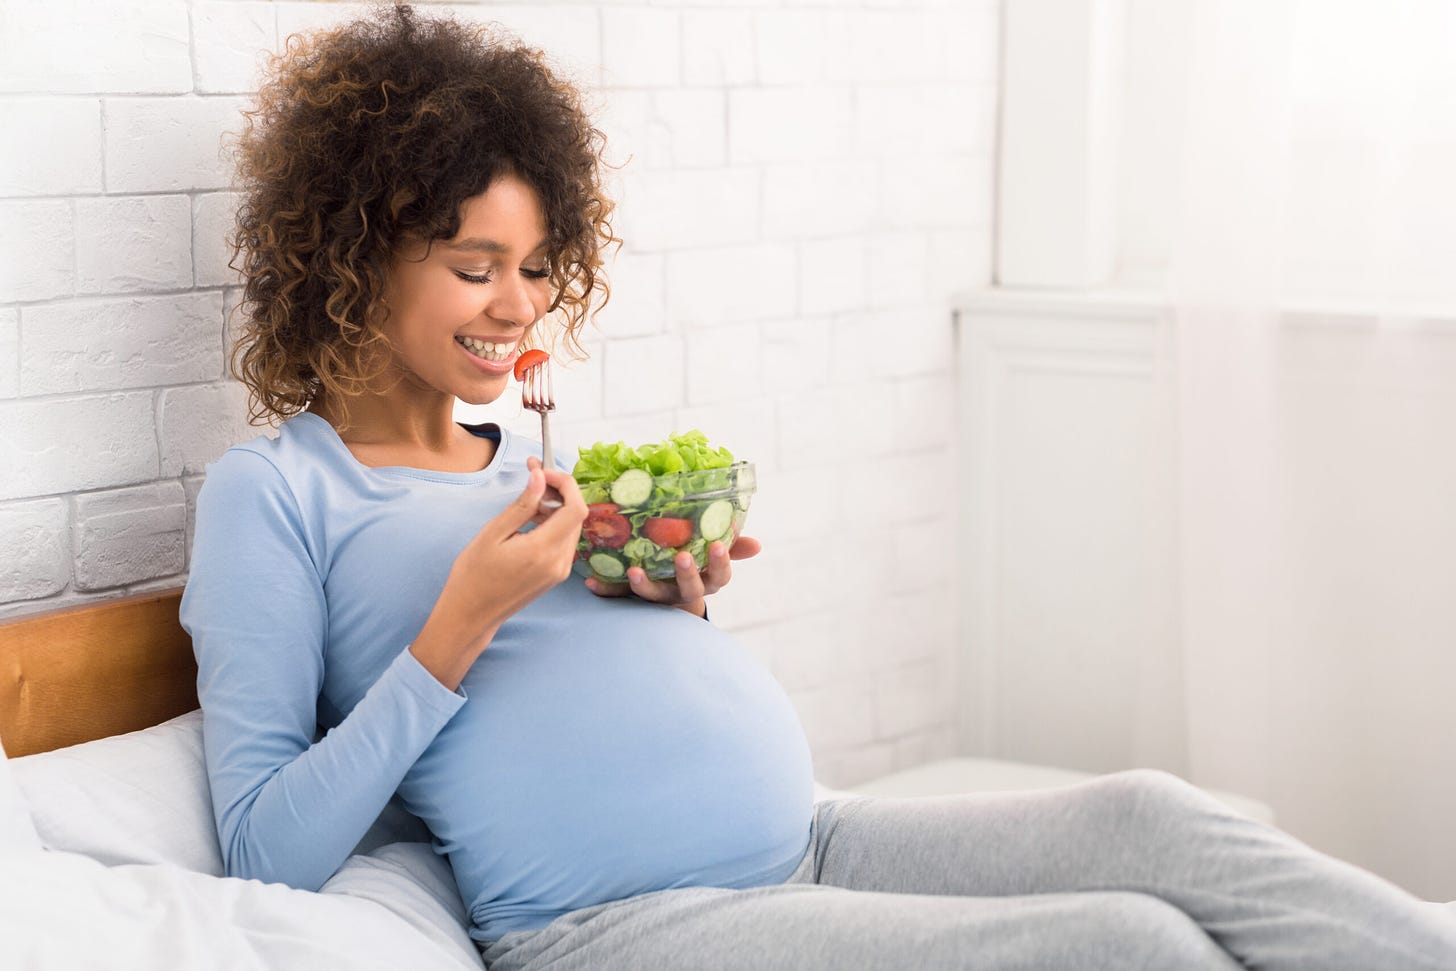 Image of a pregnant woman eating a salad and showing preferences for healthy foods